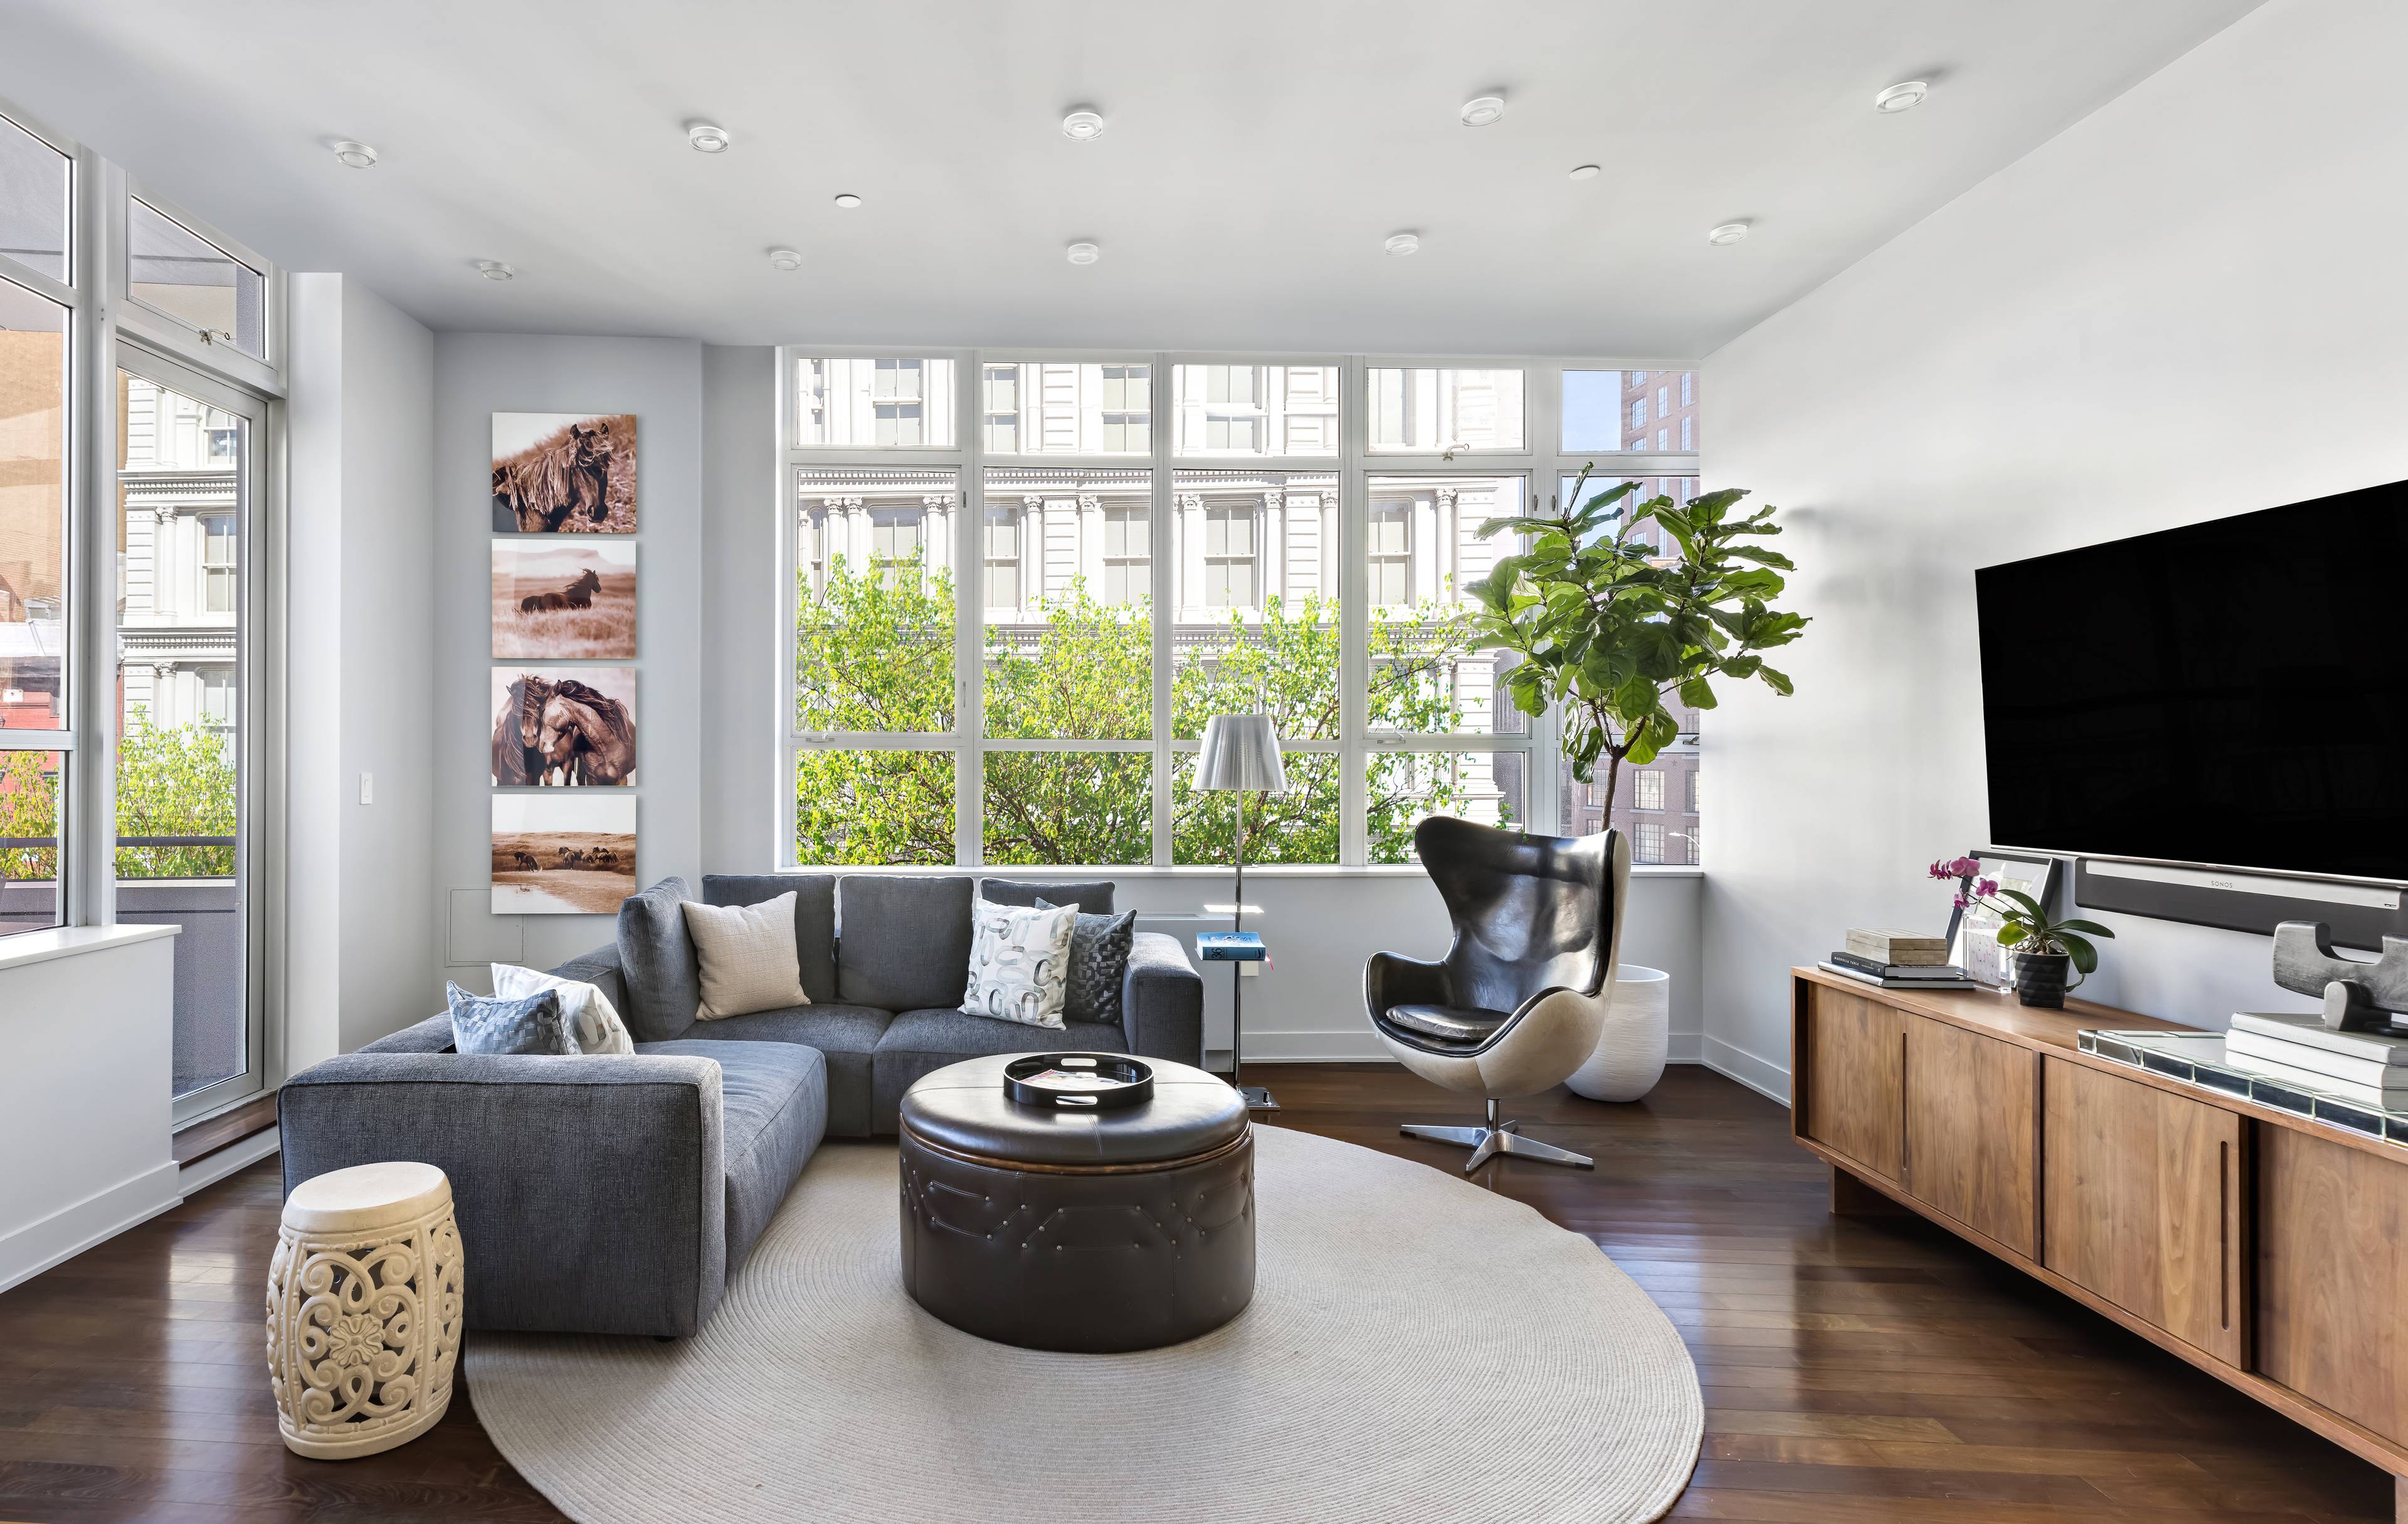 Located on arguably the most desirable block of Noho, this recently renovated, immaculate light filled 3 bedroom condominium home is a beneficiary of multiple neighborhoods Noho, Soho, The East Village, ...